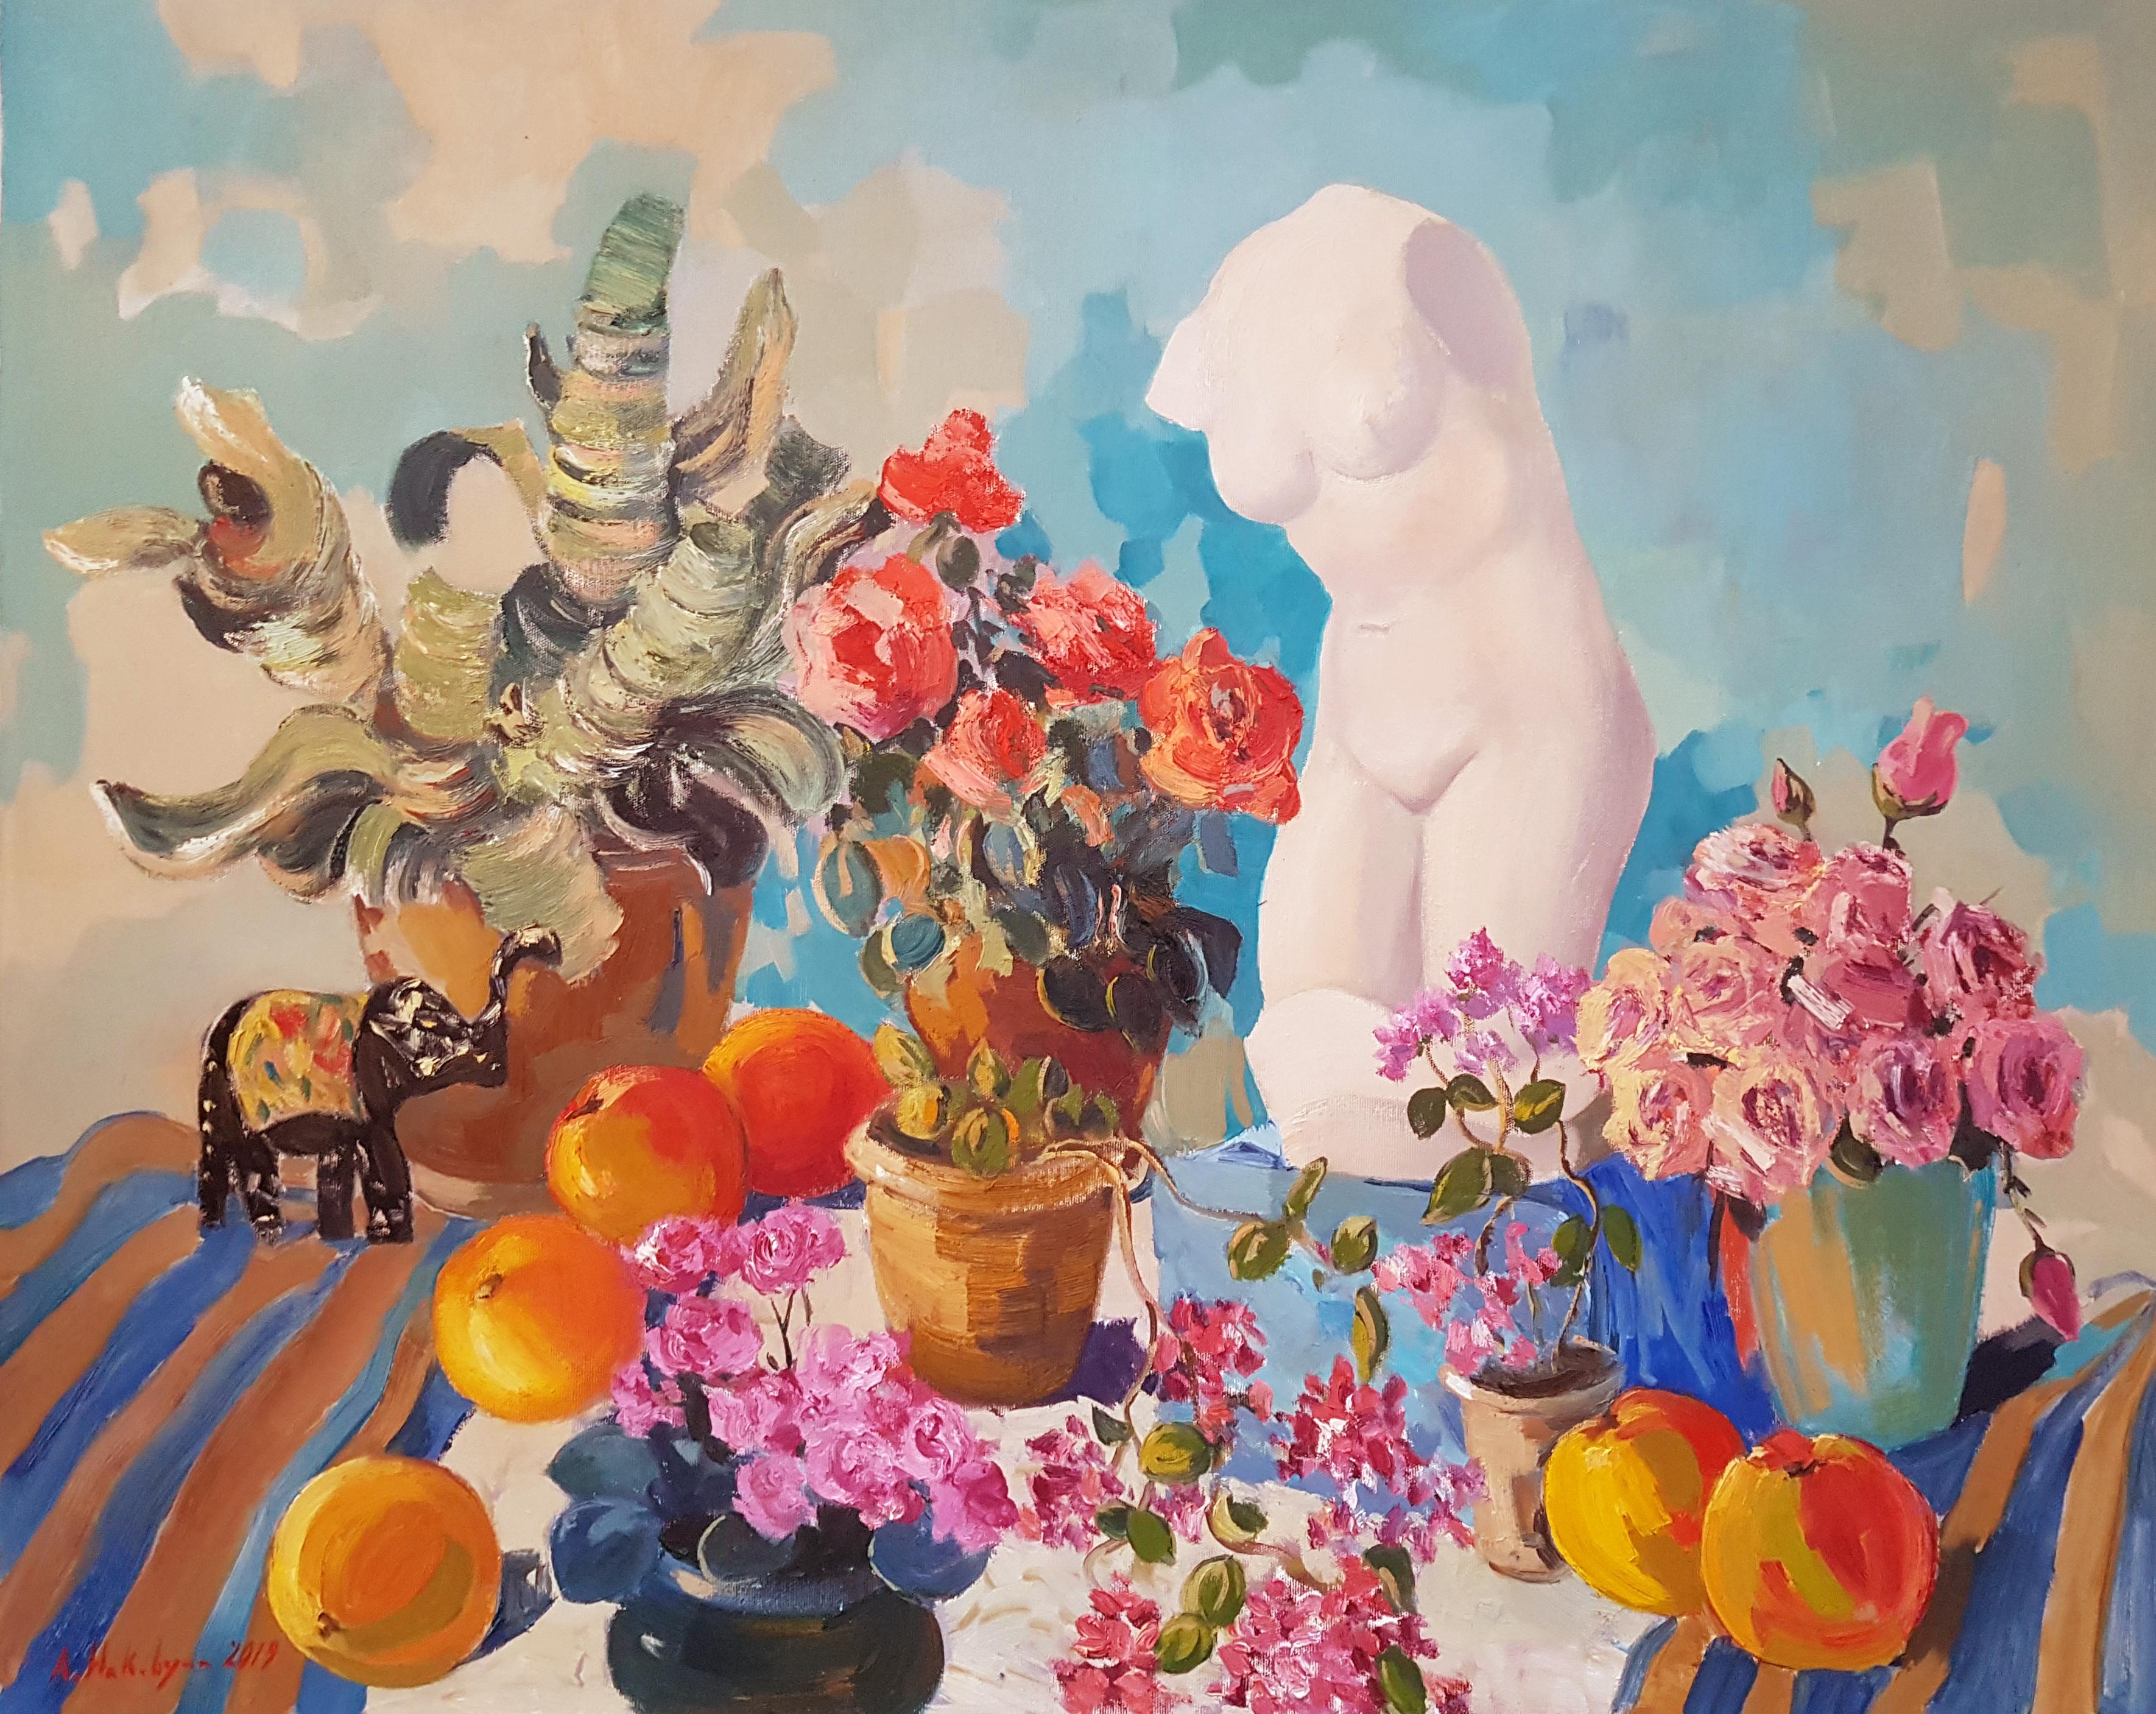 Artist: Ara H. Hakobyan
Work: Original Oil Painting, Handmade Artwork, One of a Kind
Medium: Oil on Canvas
Year: 2019
Style: Impressionism
Title: Flowers with a Statue
Size: 24